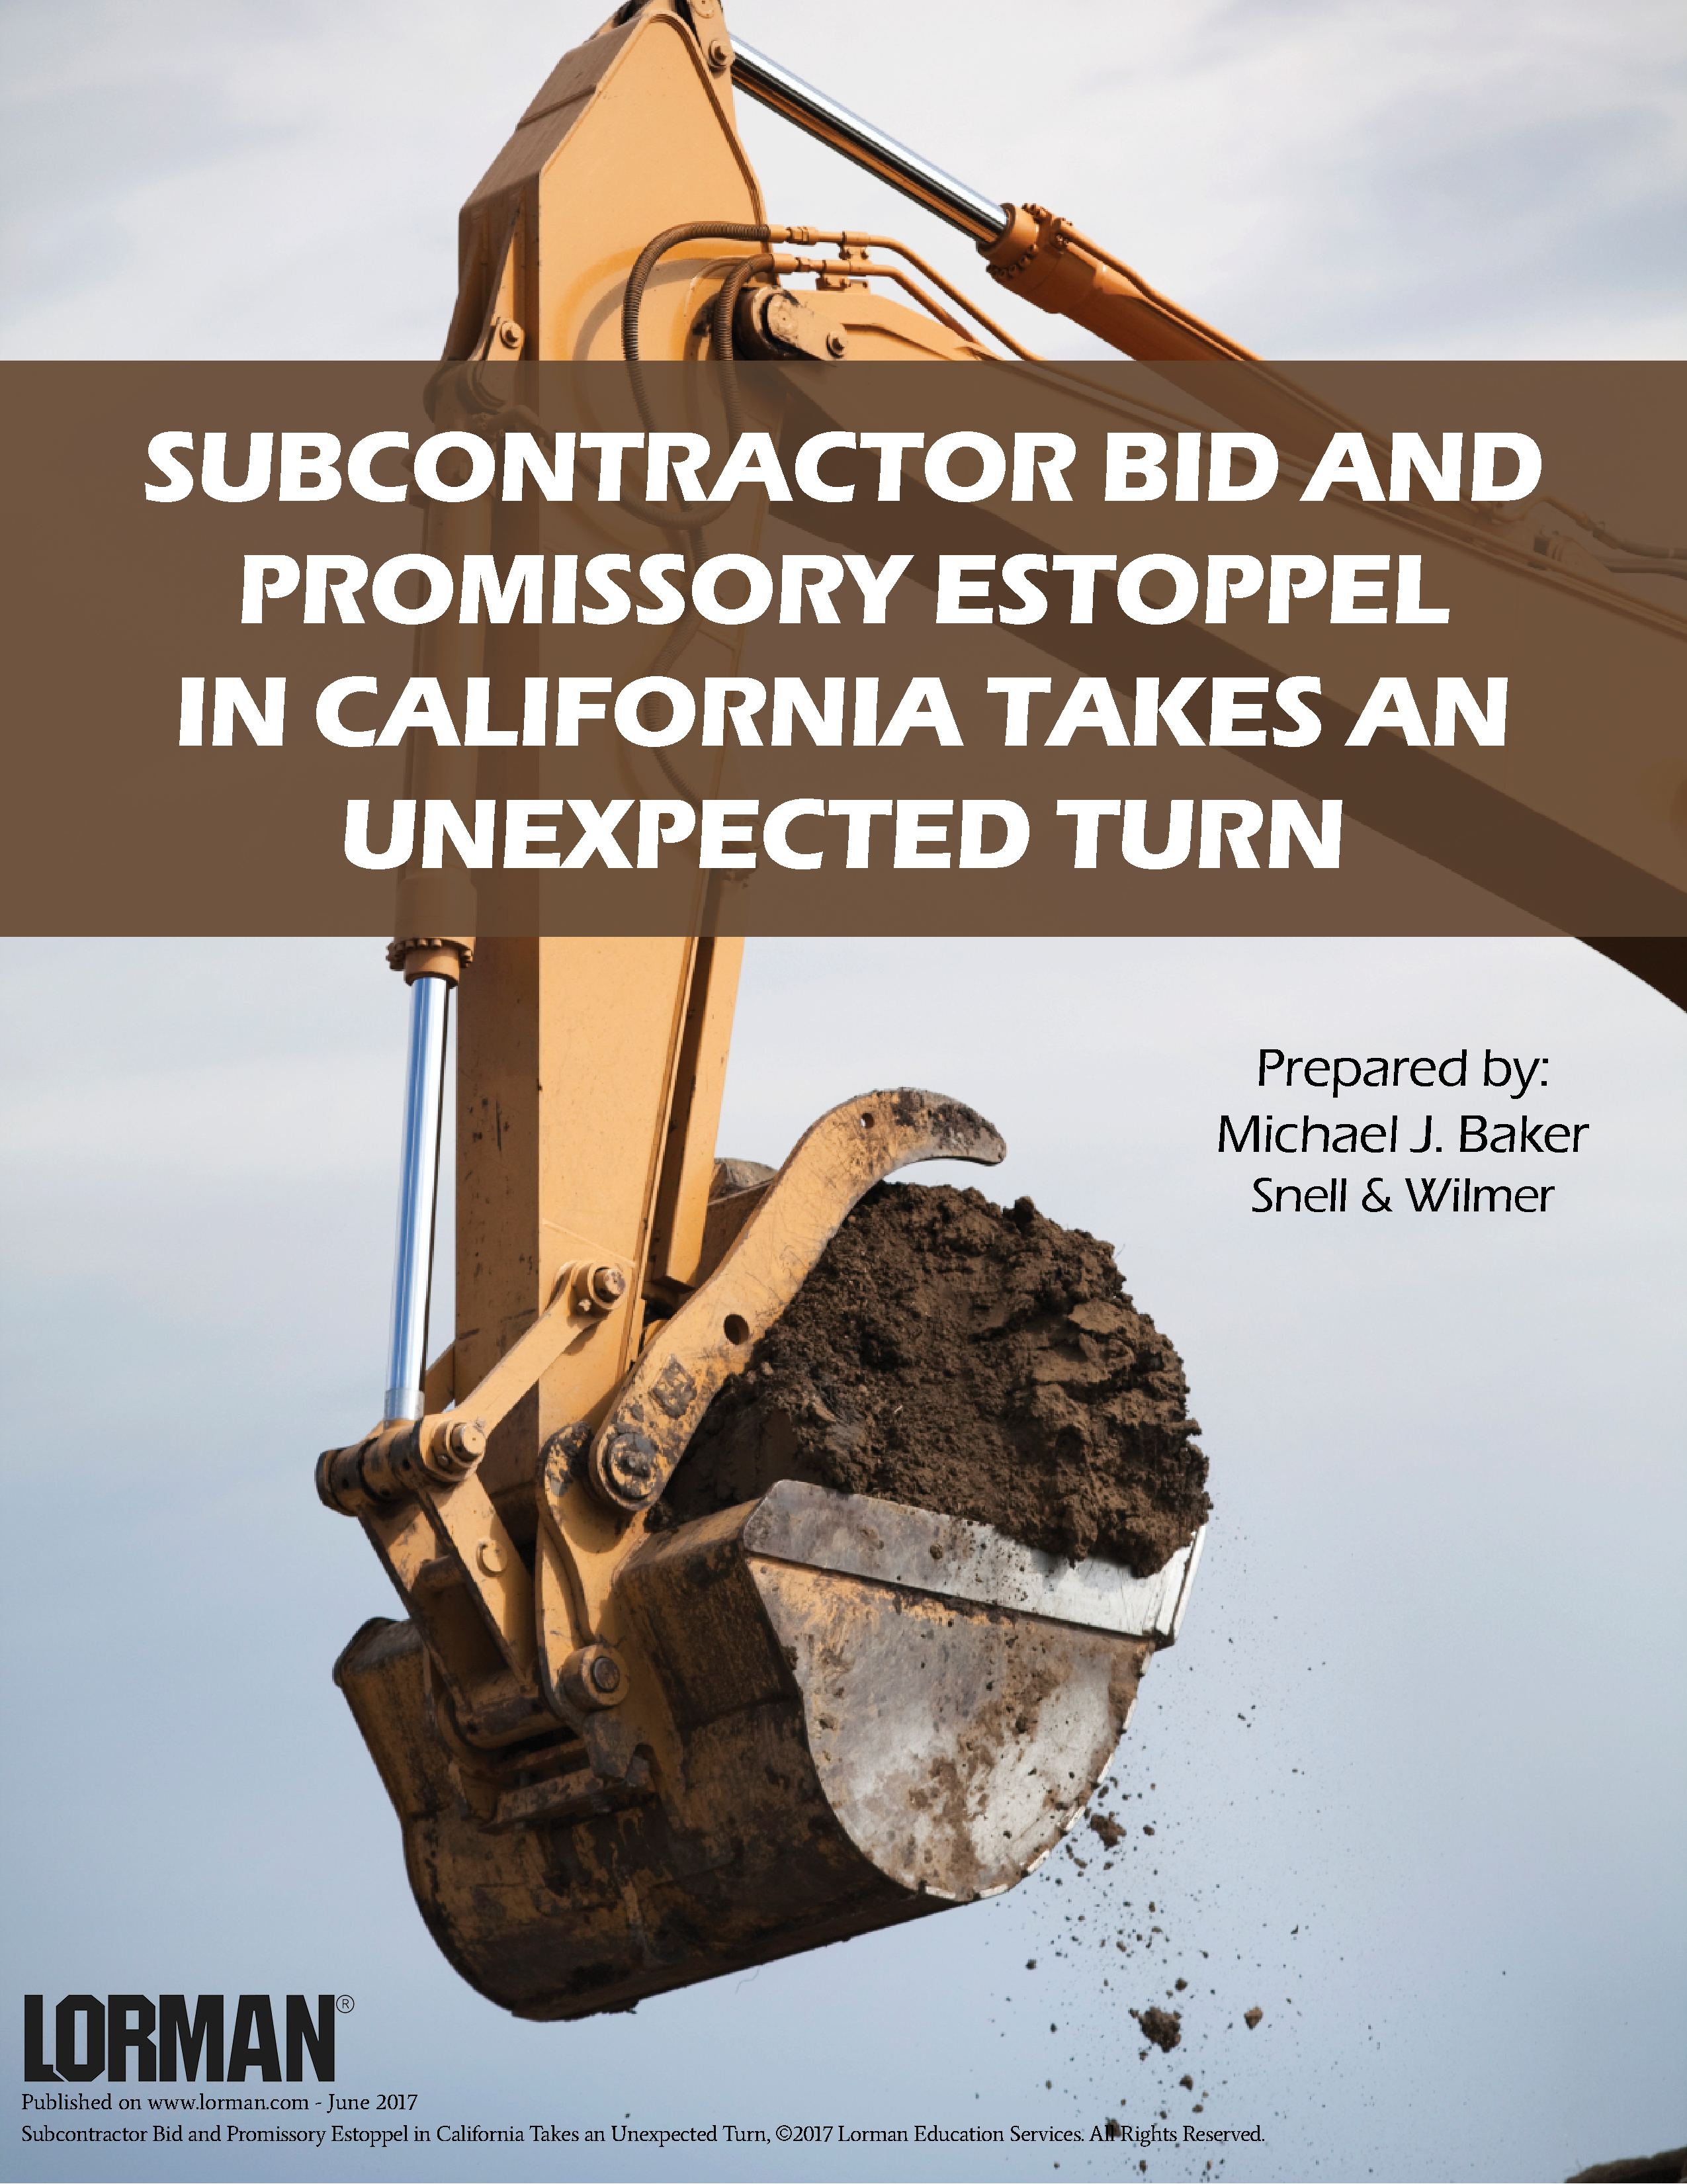 Subcontractor Bid and Promissory Estoppel in California Takes an Unexpected Turn